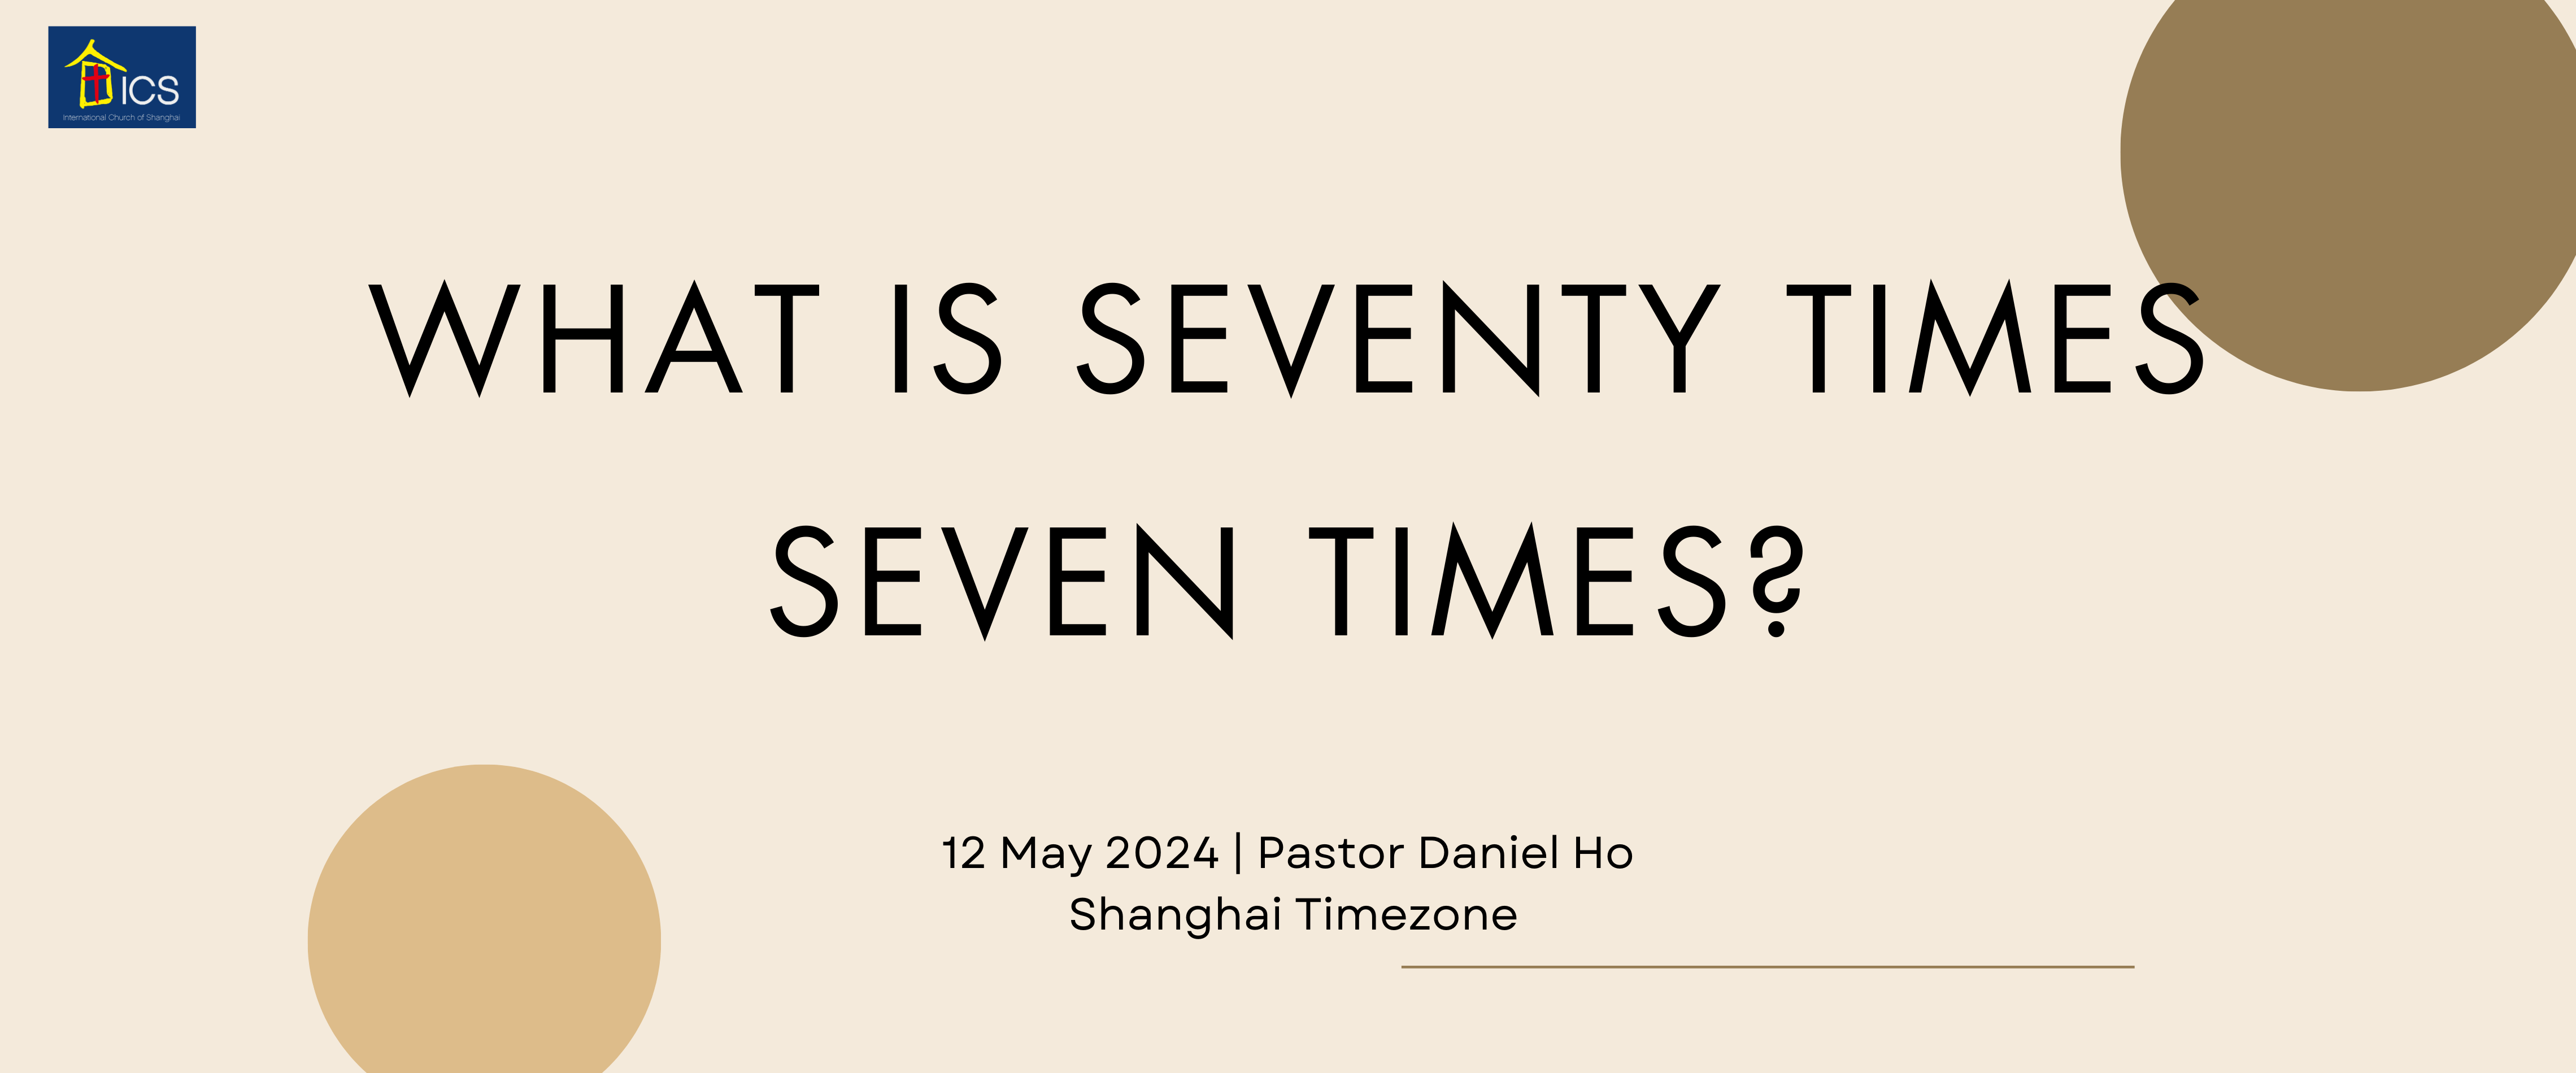 What Is Seventy Times Seven Times?